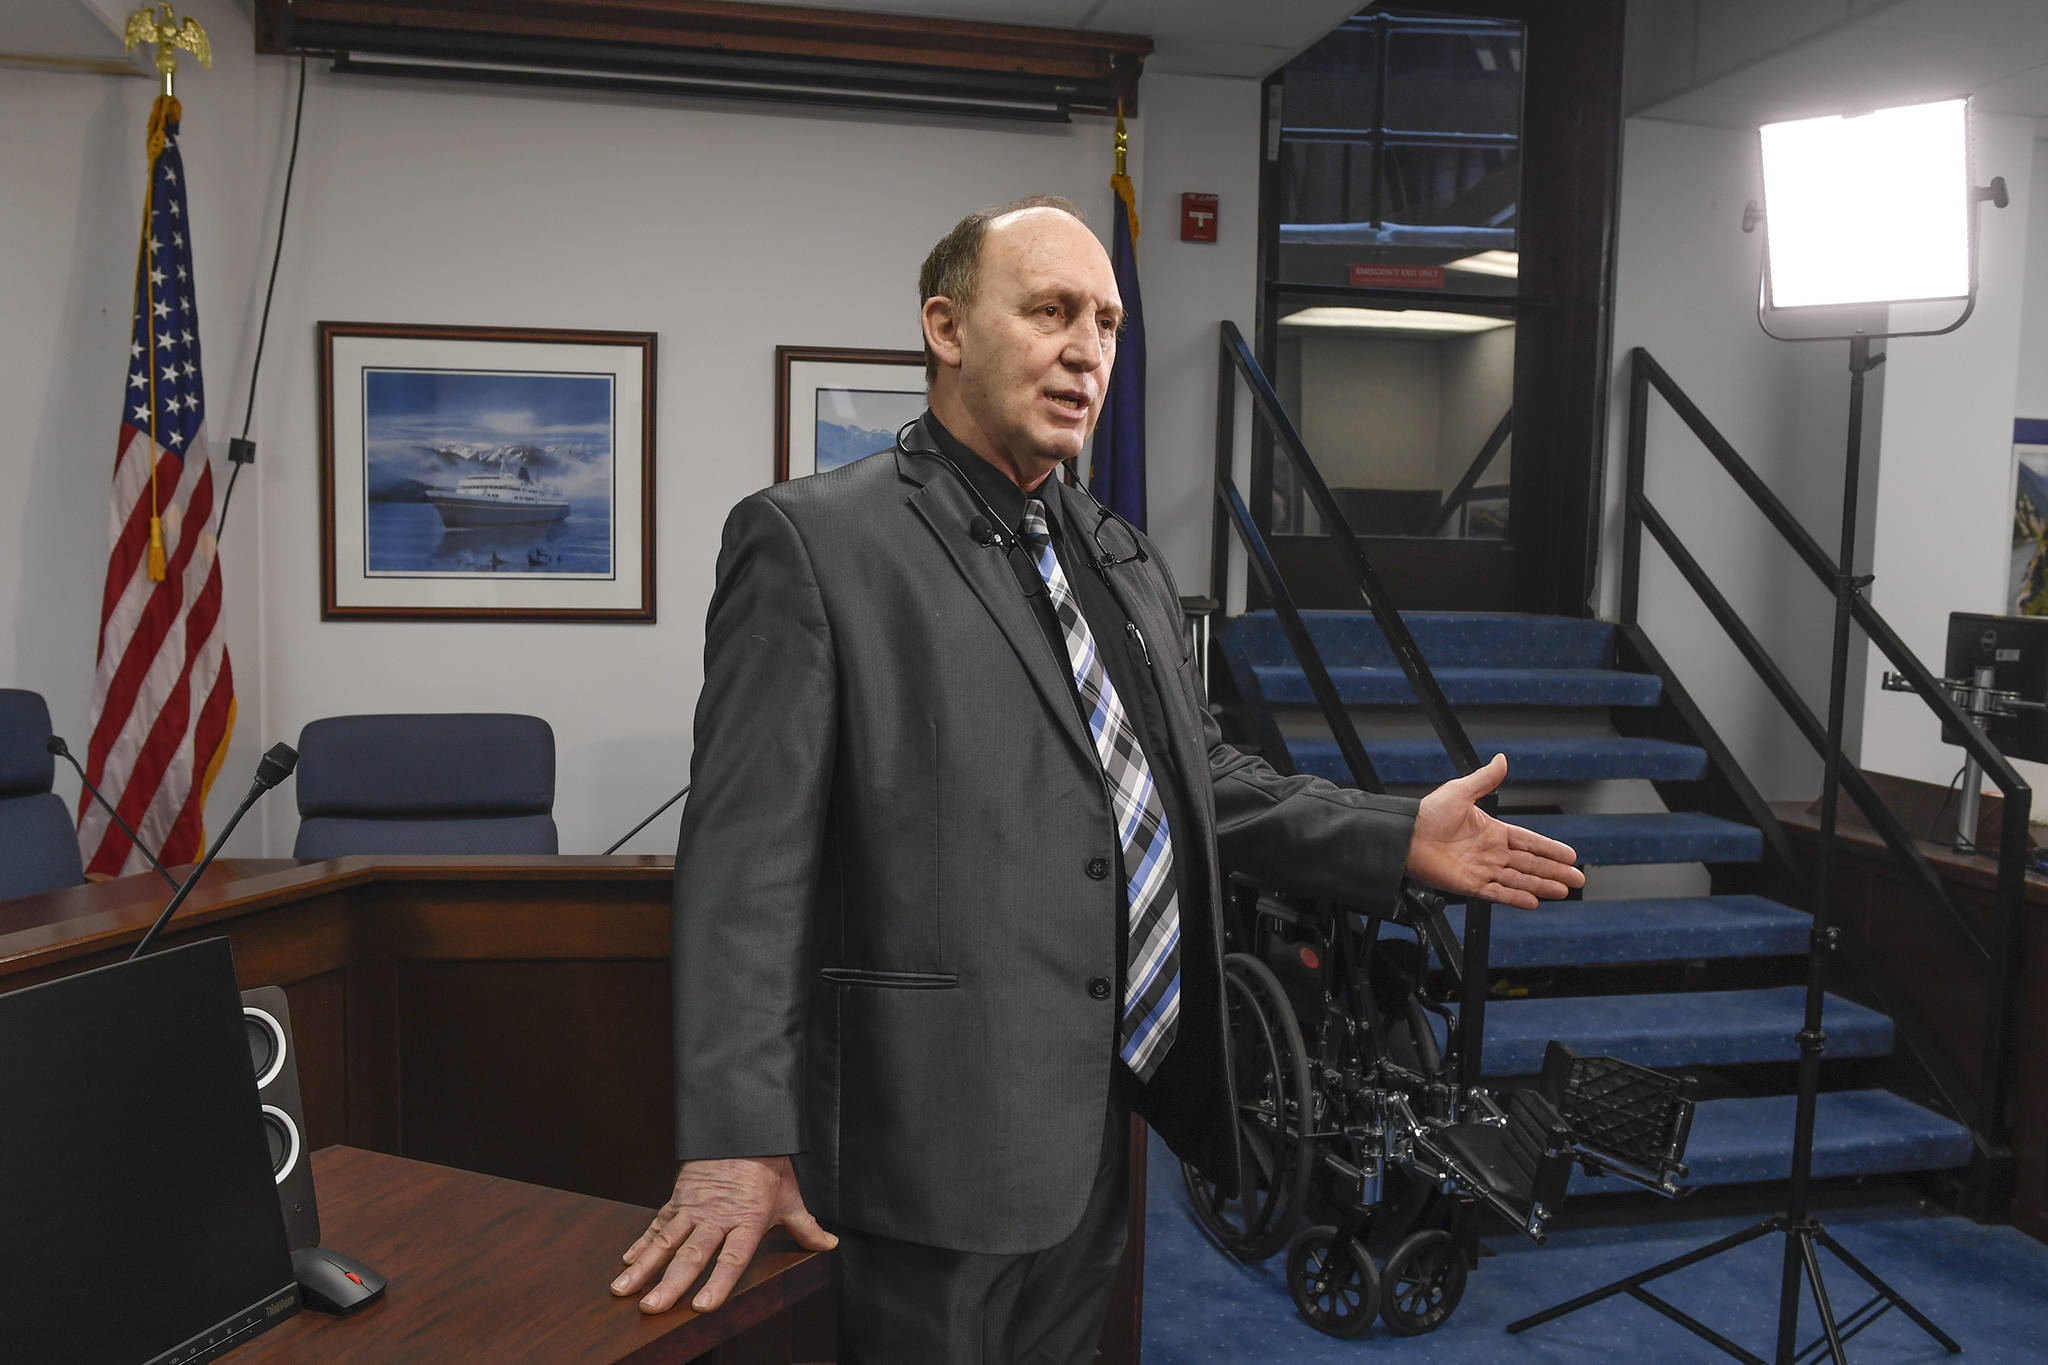 Rep. Gary Knopp, R-Kenai, talks to the media about his nomination for Speaker of the House at the Capitol on Tuesday, Feb. 12, 2019. (Michael Penn | Juneau Empire)